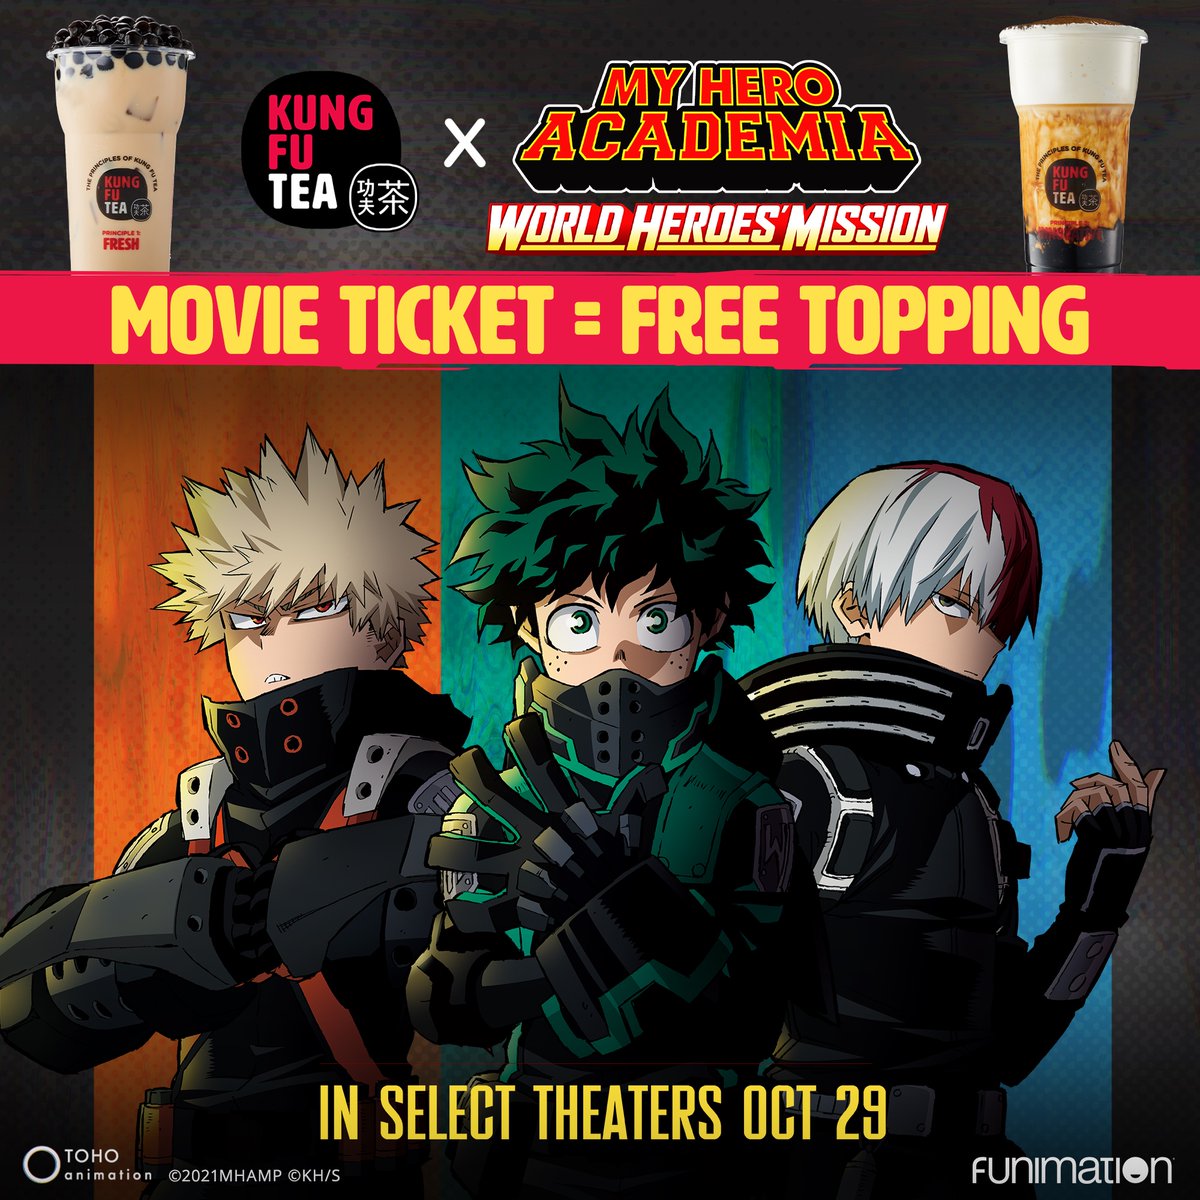 My Hero Academia on Twitter: 'NEWS: My Hero Academia: World Heroes' Mission  and @kfteausa Team Up for Free Toppings Read on: https://t.co/qYEs3rsSYQ  https://t.co/ggsxLj41Hm' / Twitter